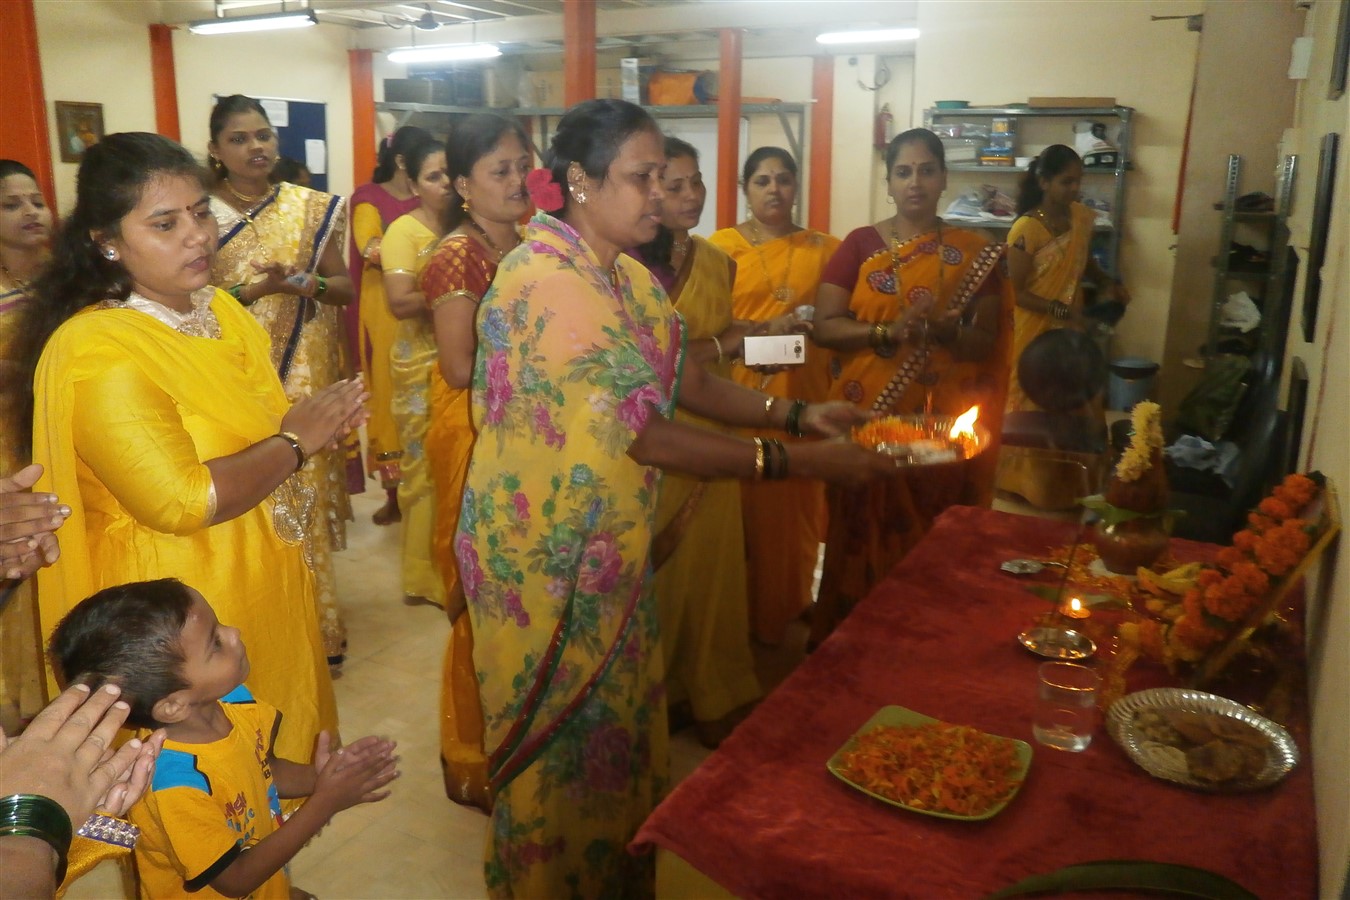 Performing the puja at the beginning of the programme